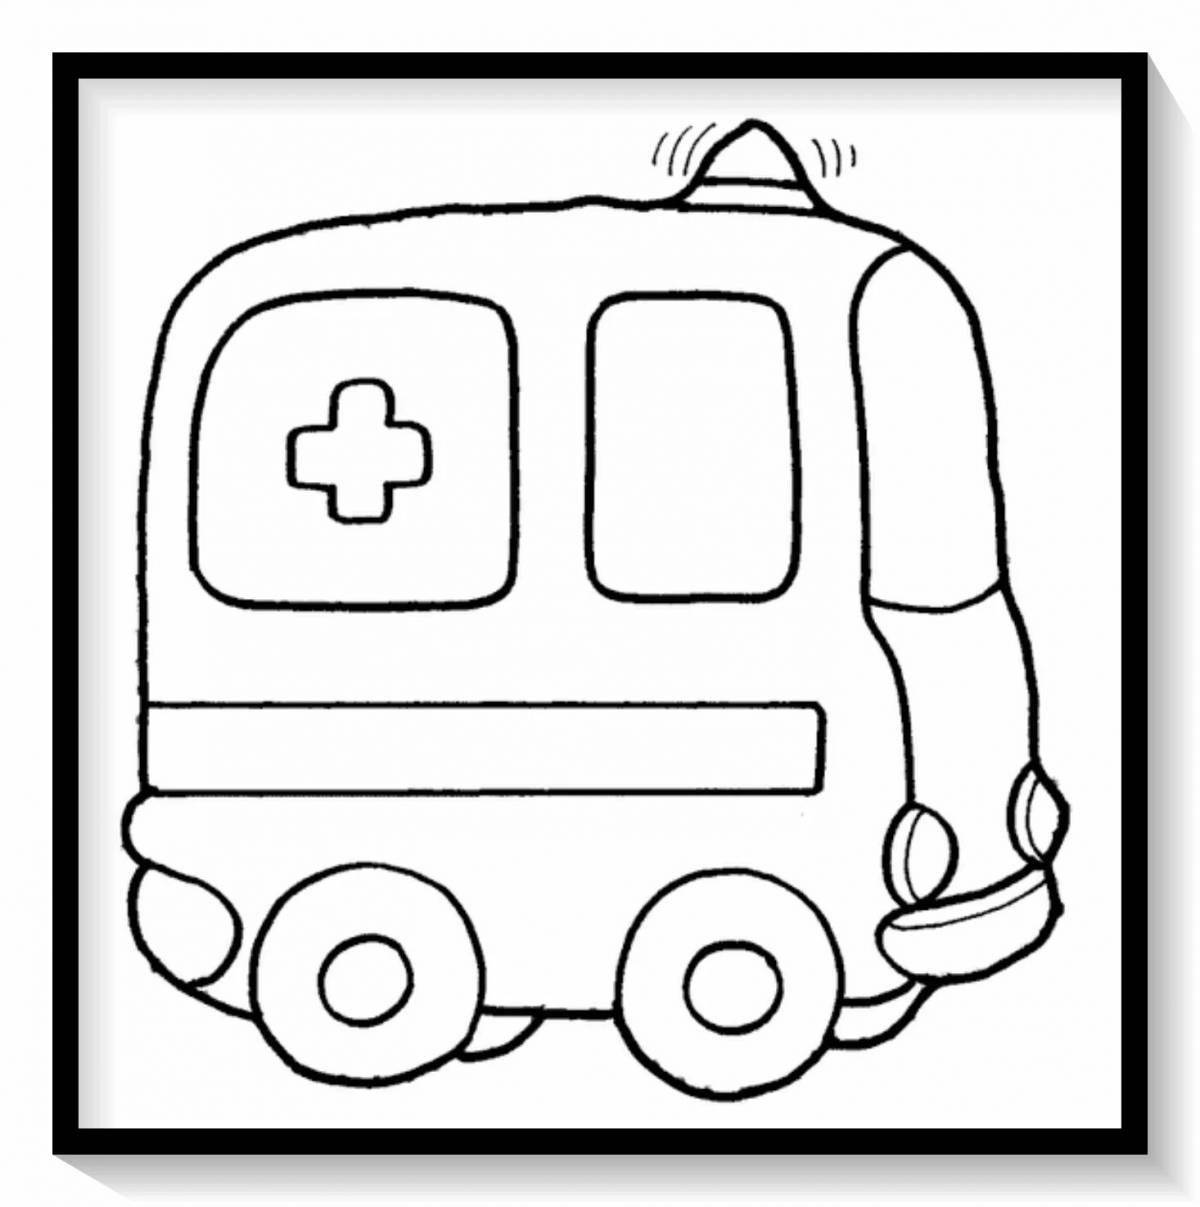 Amazing car coloring book for the little ones